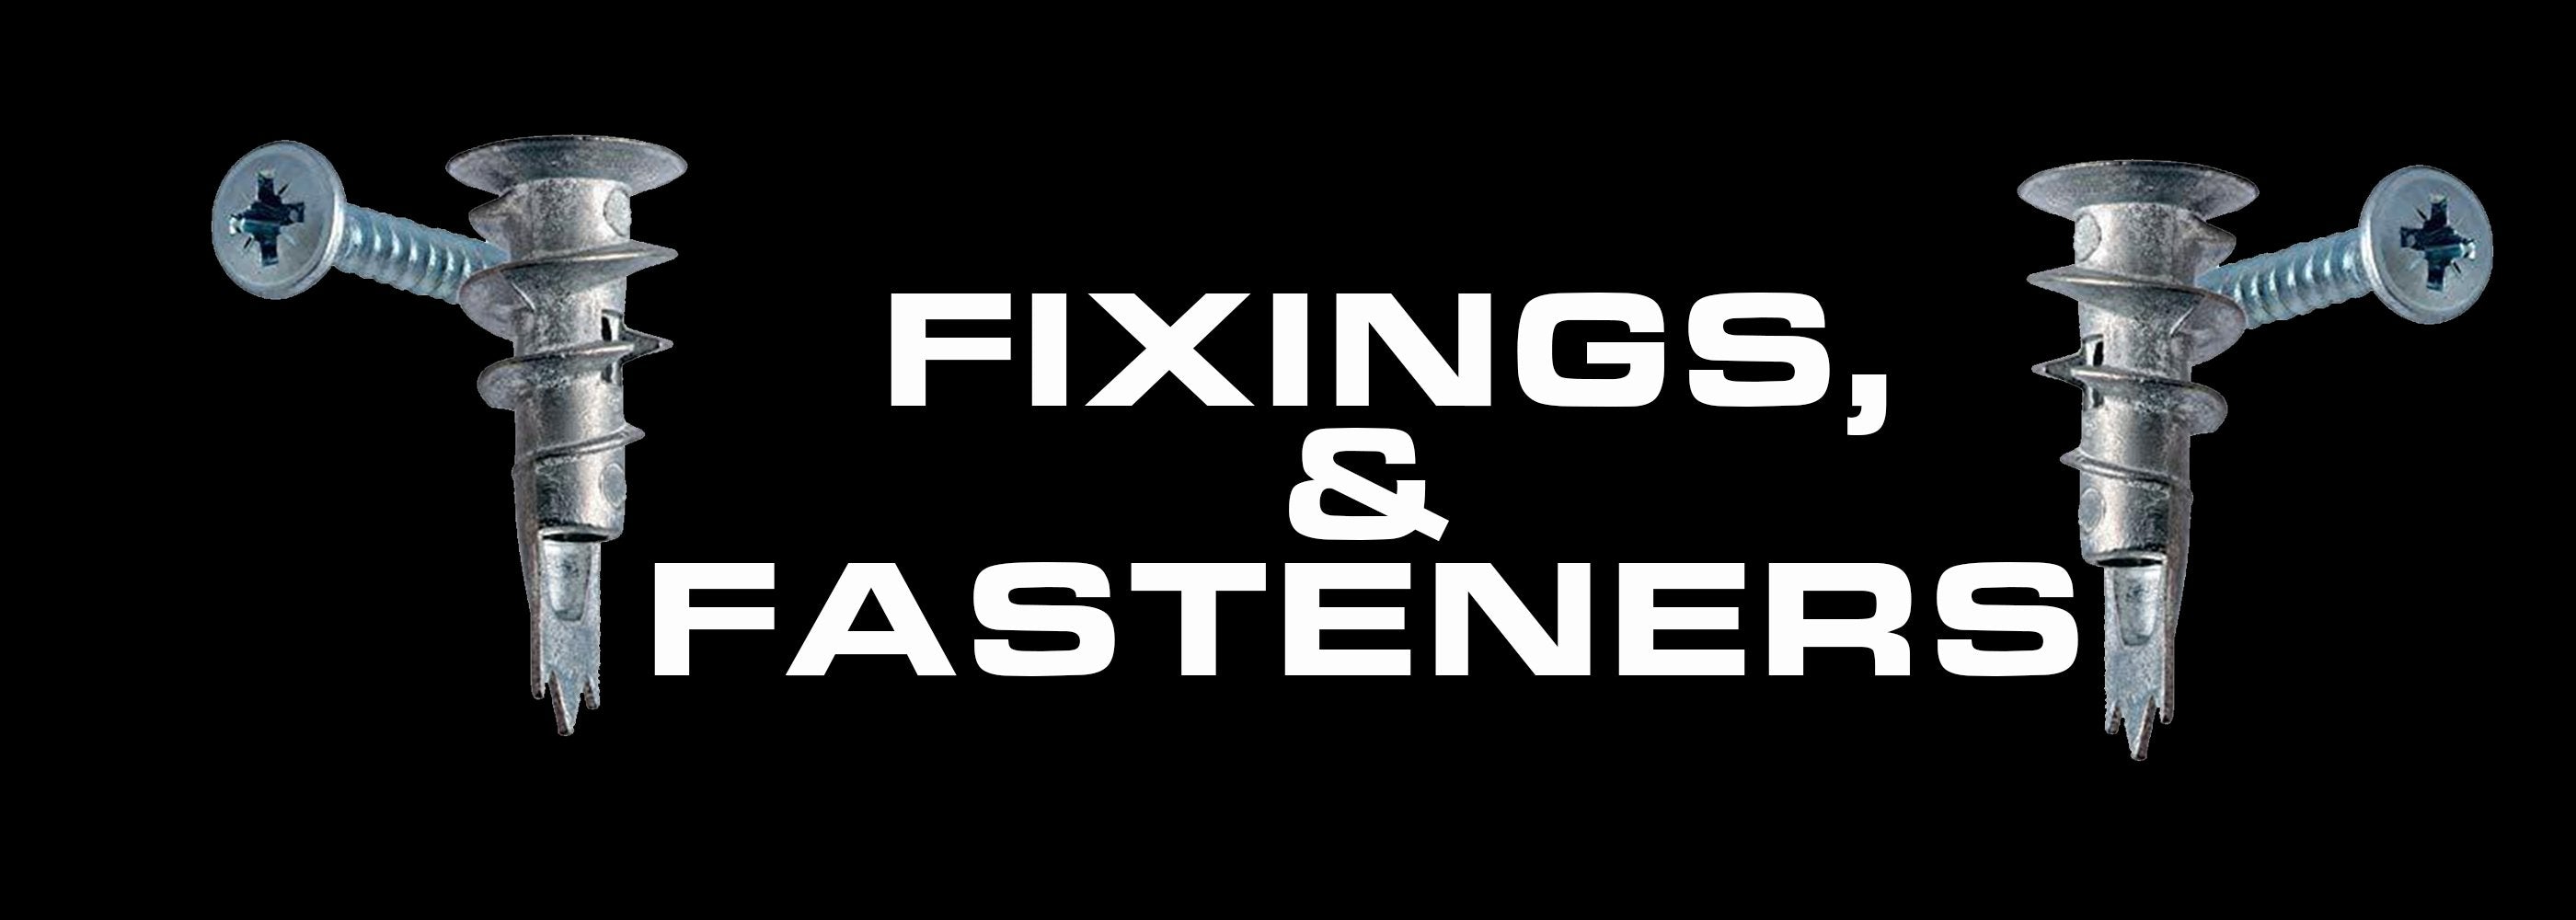 CATEGORY BANNER FOR FIXINGS & FASTENERS CATEGORY FOR UNITED FIXINGS